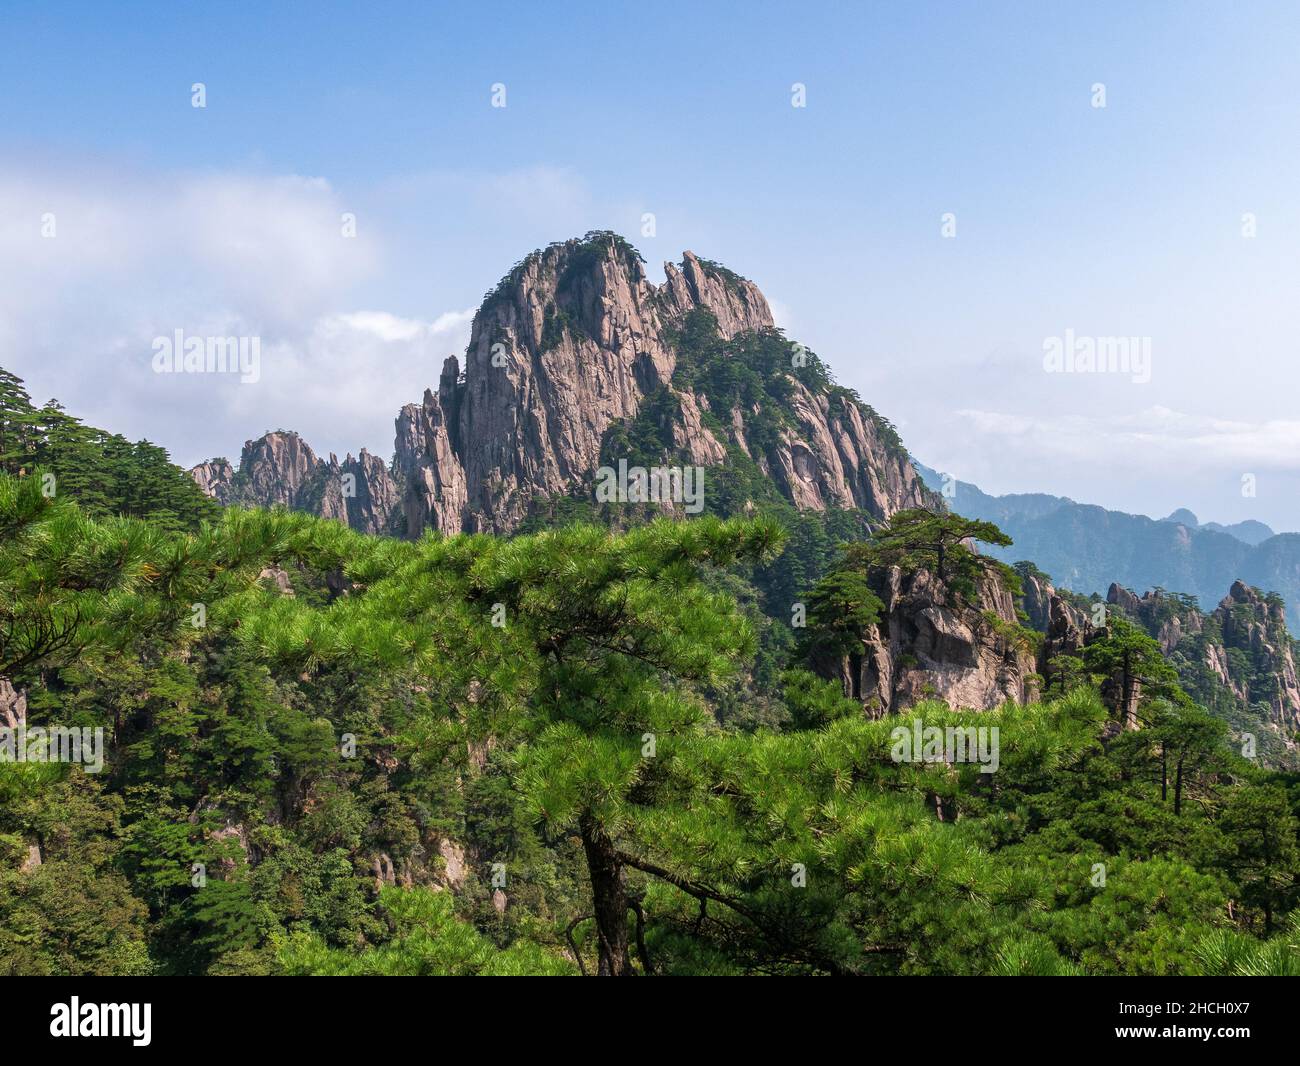 Rock at the yellow mountains with a beautiful blue sky on a summer day, Huangshan mountains, Anhui, Huangshan, China, Asia, Stock photo Stock Photo